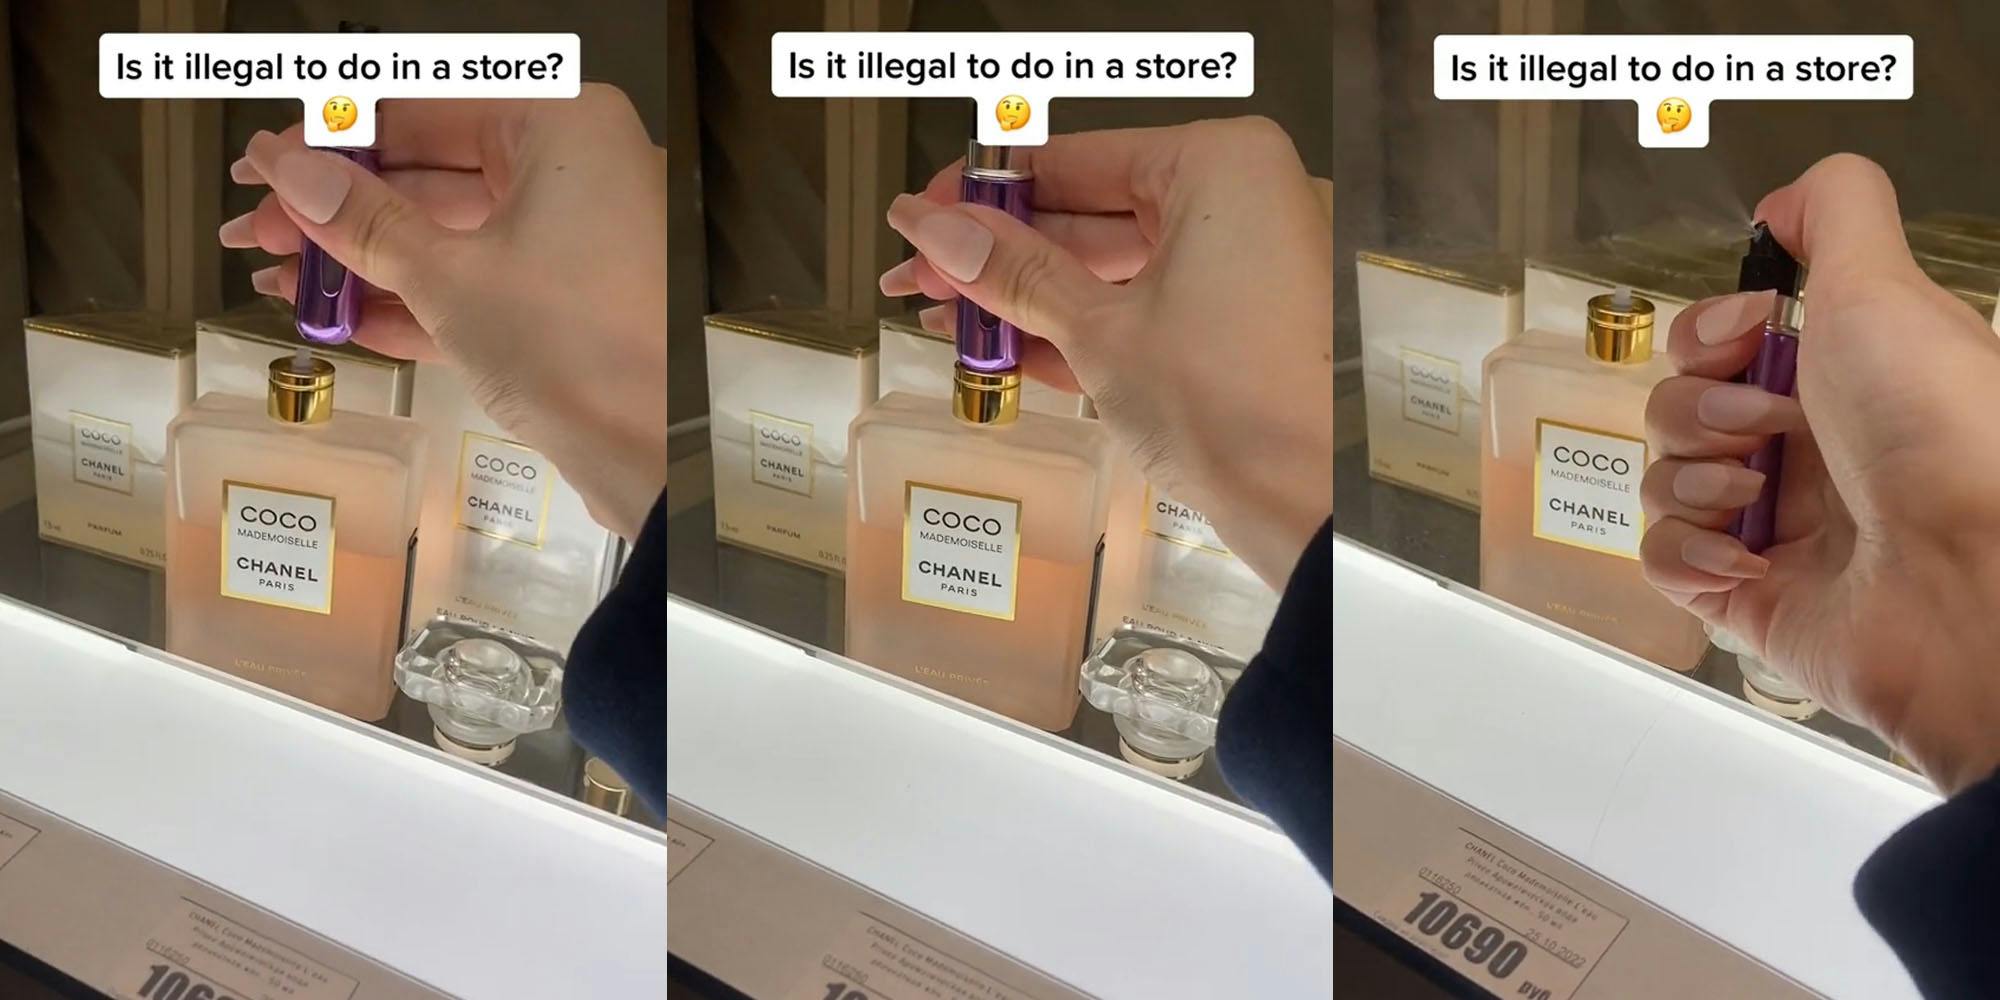 Customer Uses Capsule to Take Perfume, Asks if It's 'Illegal